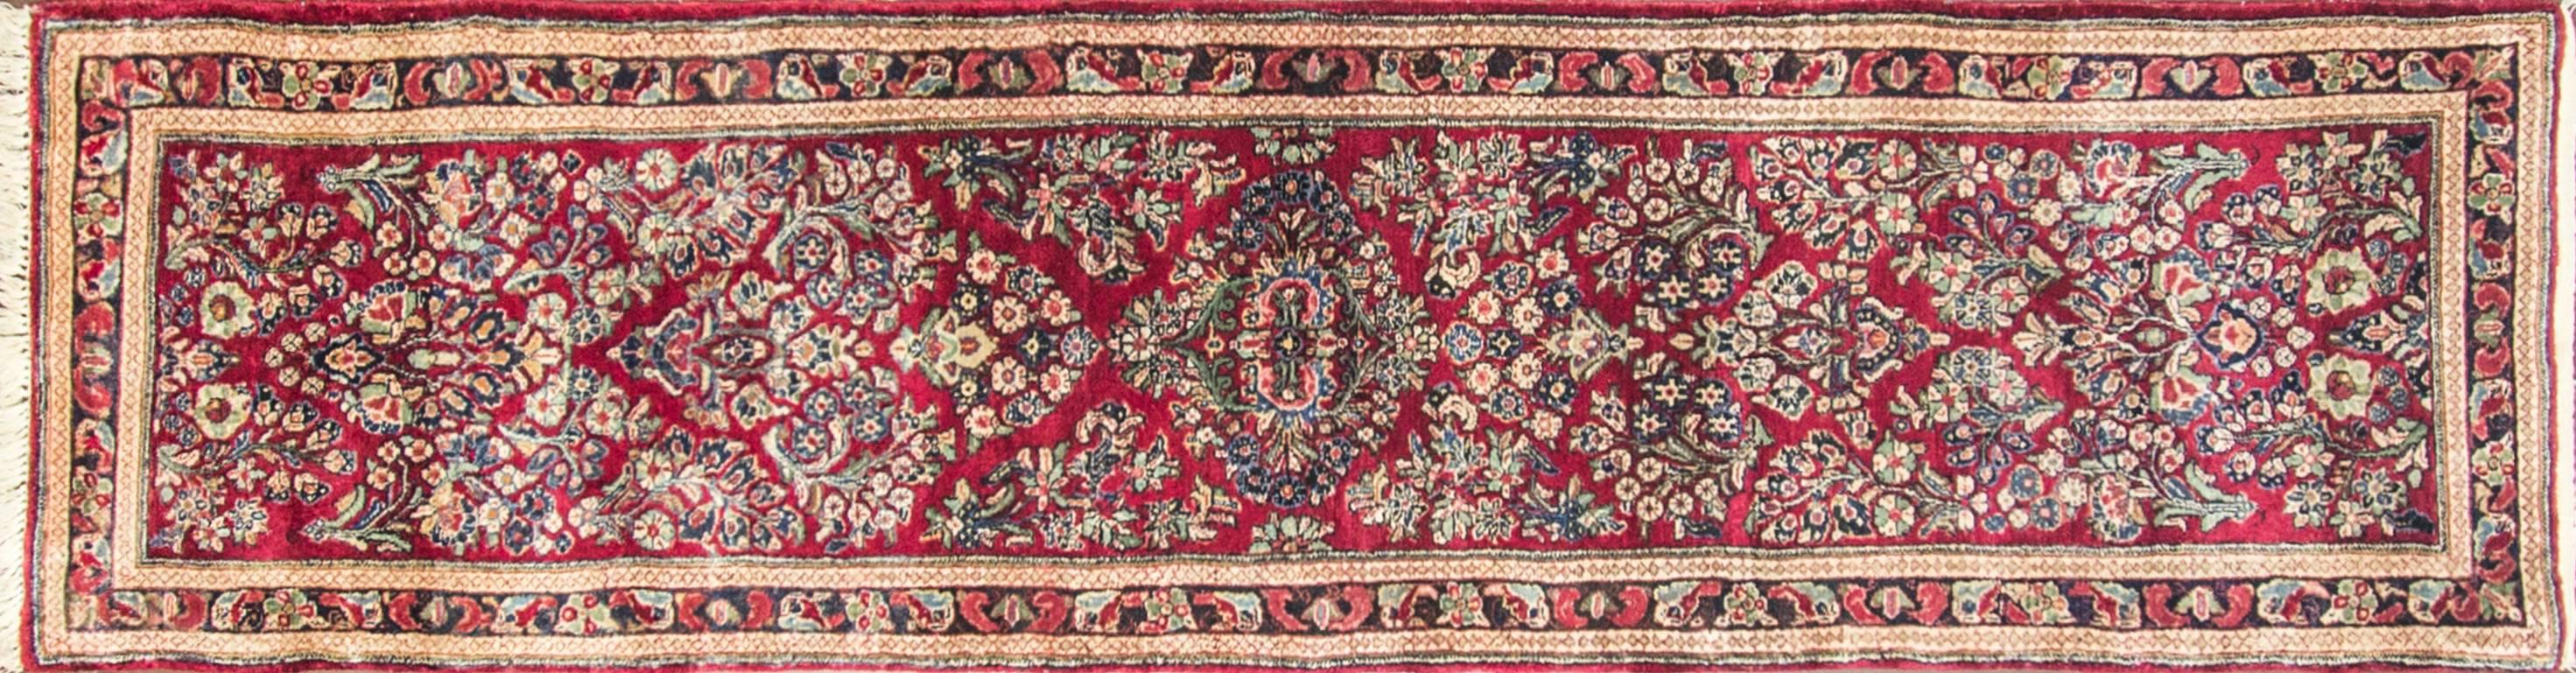 Sarouks also called Sarouks are double-wefted, heavier carpets with a higher knot count than rug from the village of Sultanabad. Fields are often blue or ivory and designs typically feature either large medallions or representations of trees and